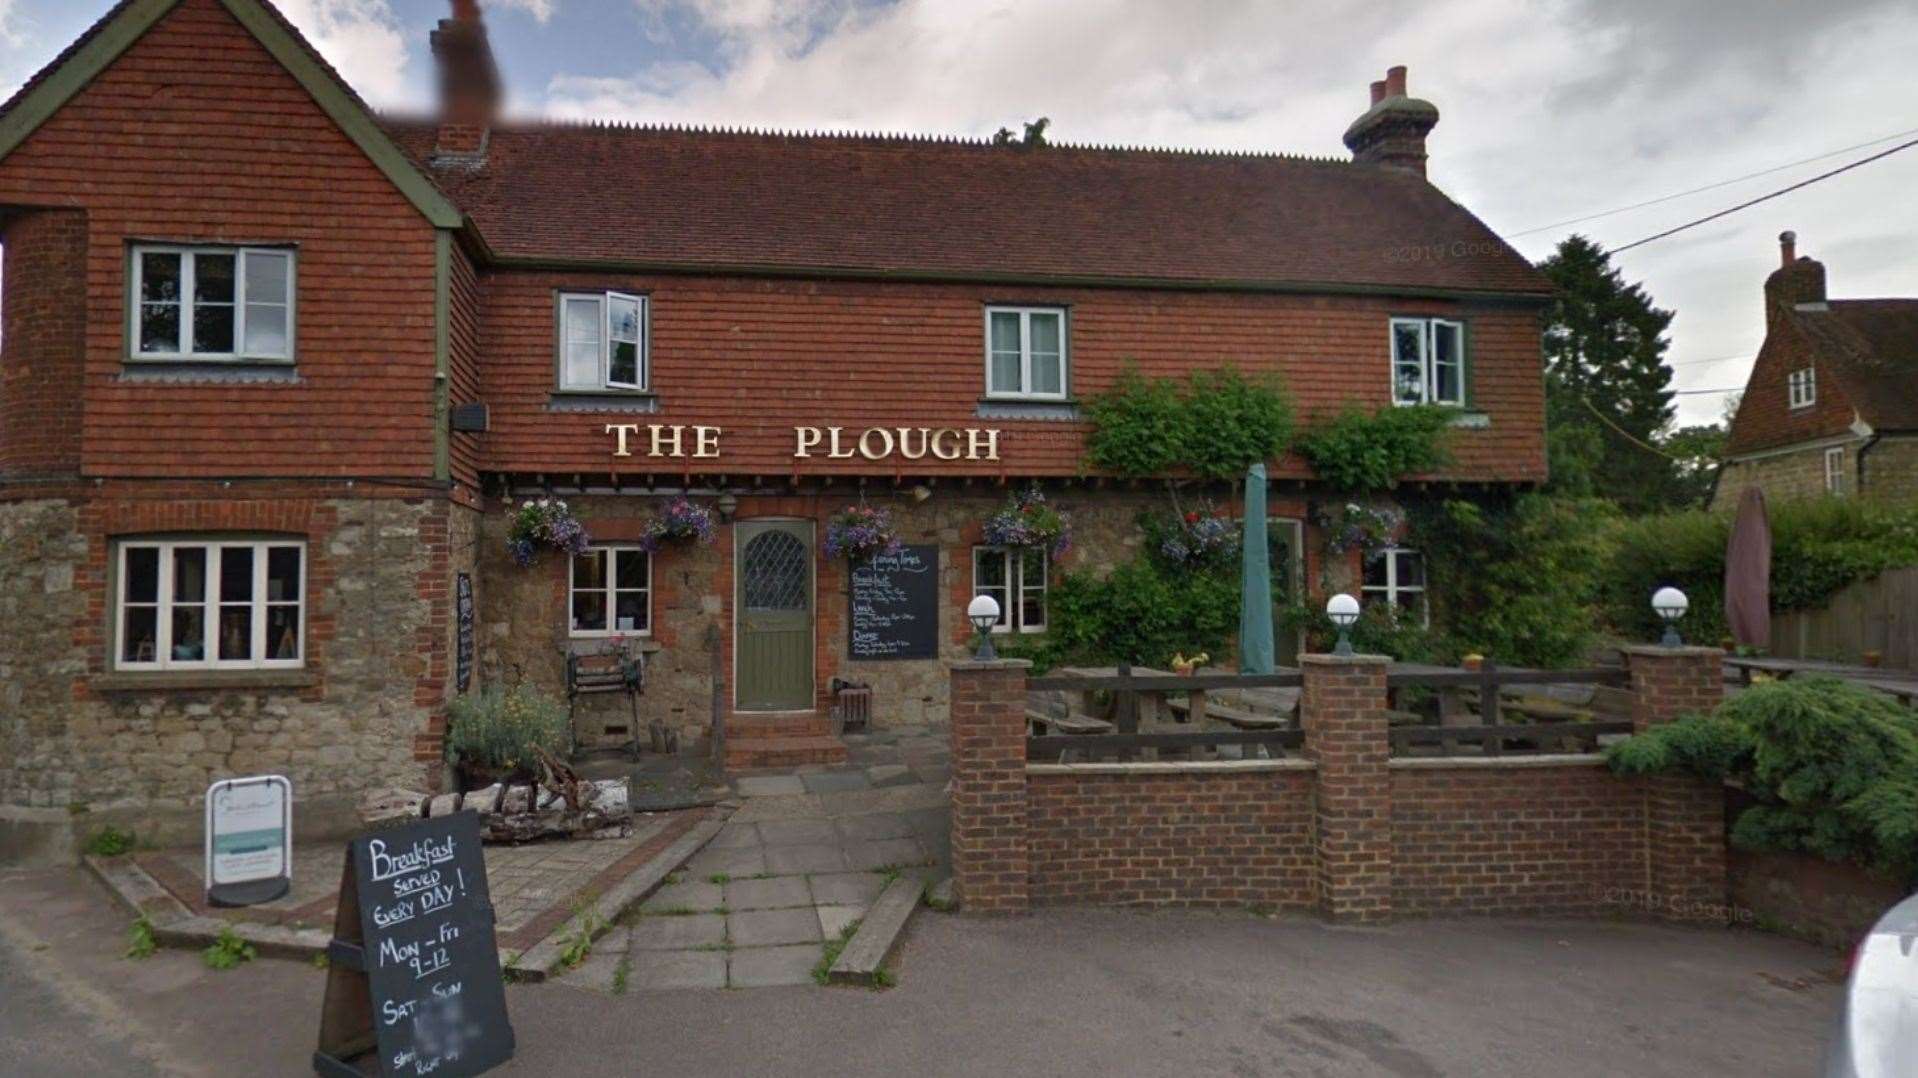 The Plough will have to remain closed, despite low local coronavirus rates and being close to the East Sussex border. Pic: Google Maps